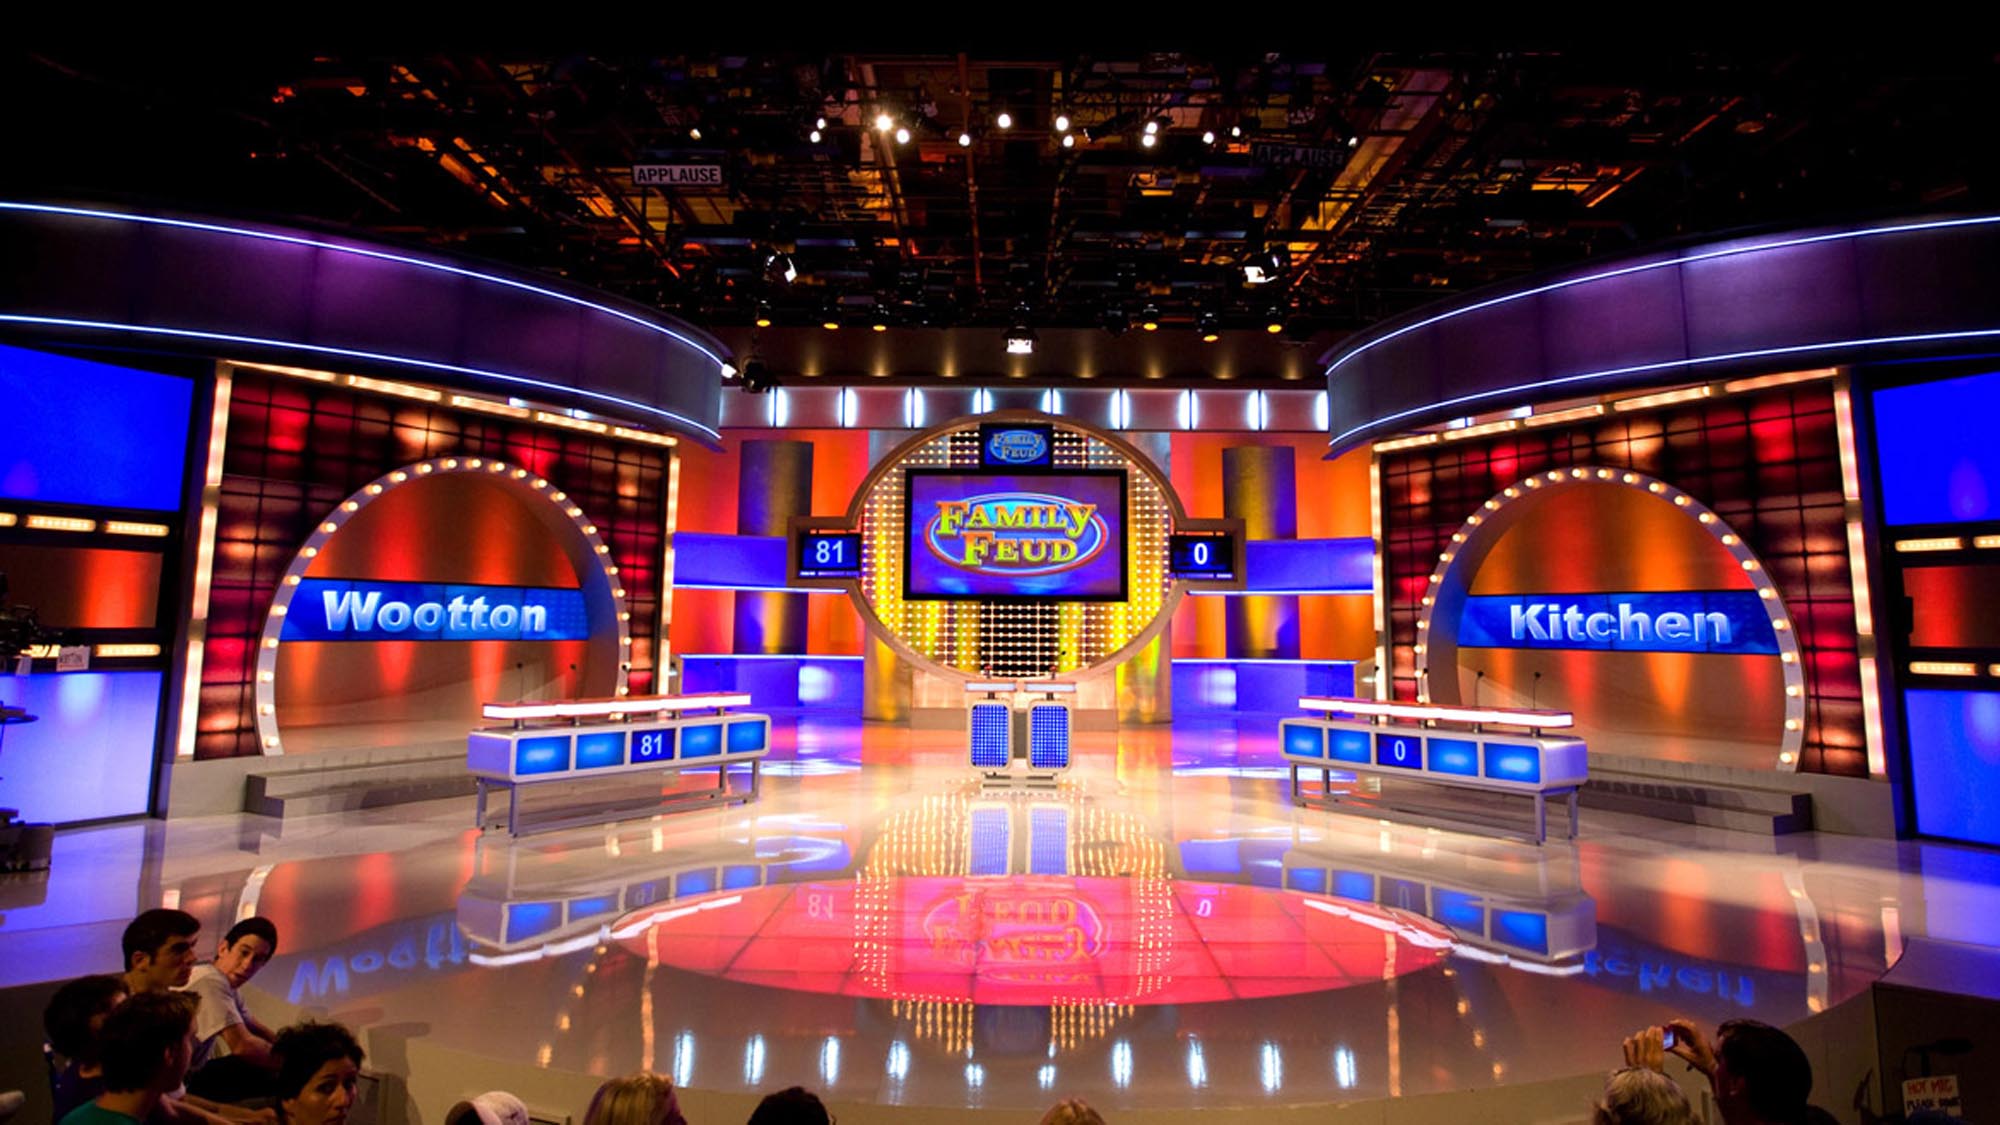 photos old set of family feud